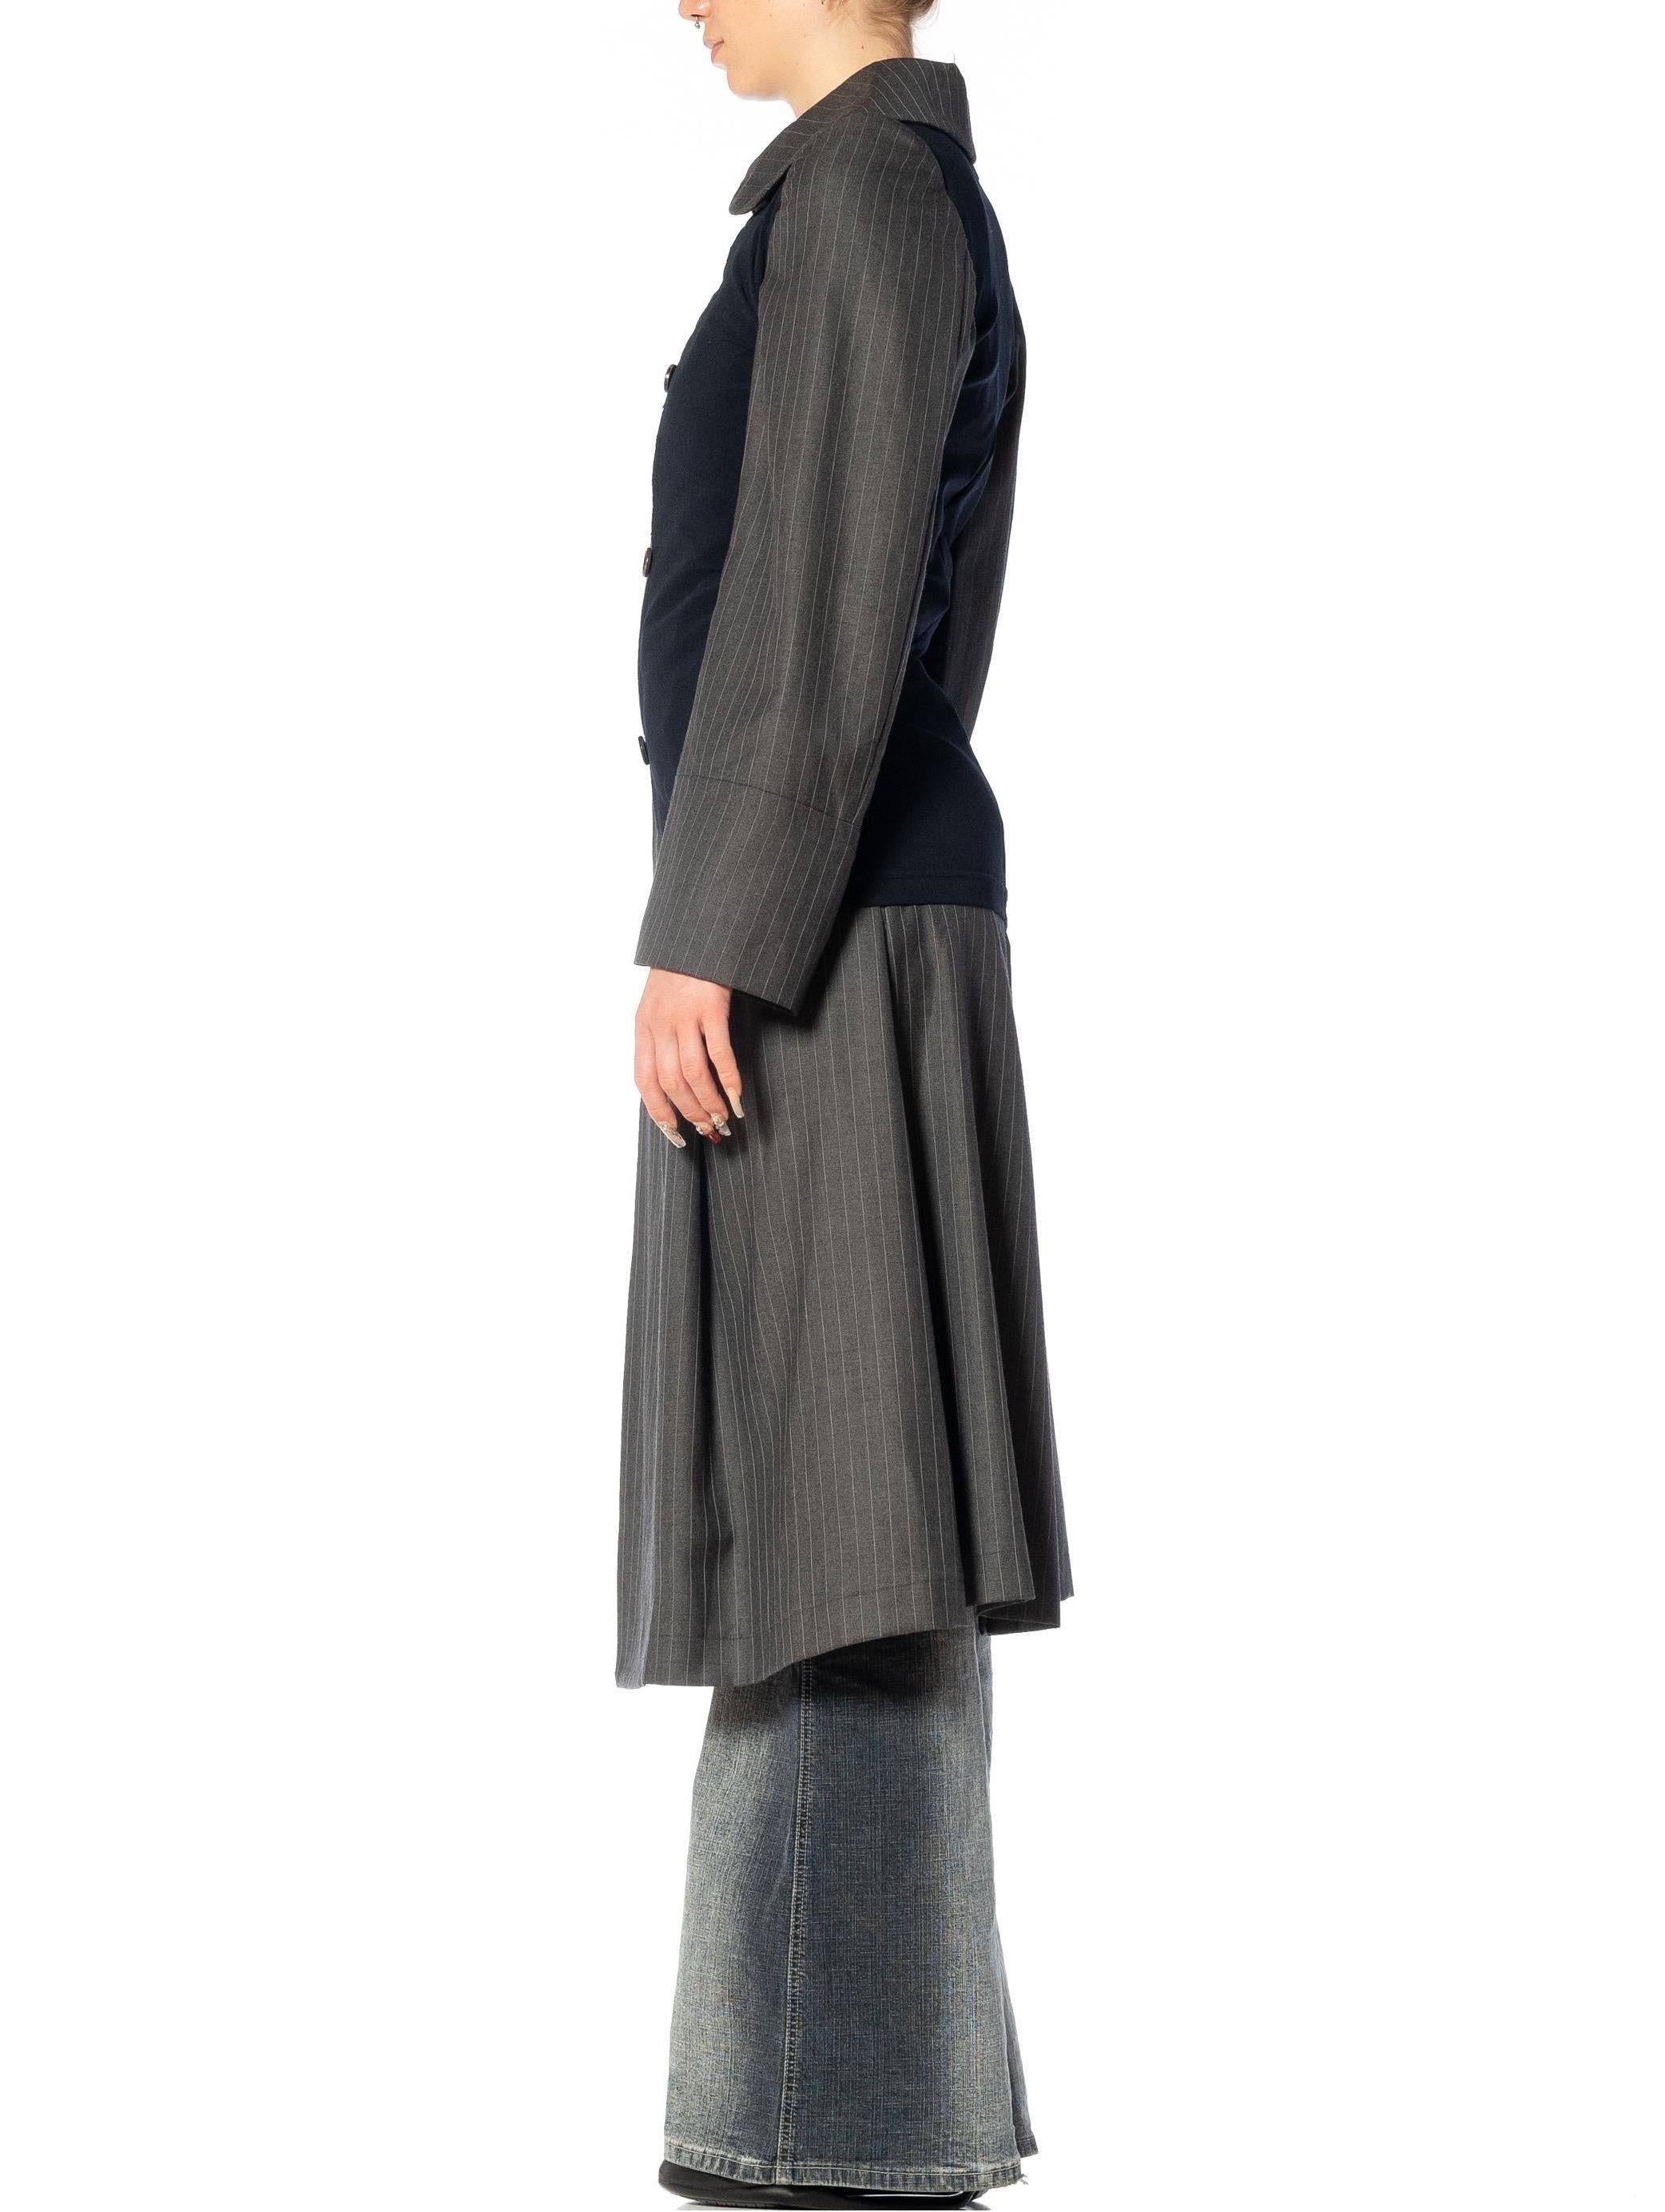 Women's 2000S COMME DES GARCONS Gray & Navy Wool Coat With Shrunken Poly Over-Layer 2007 For Sale